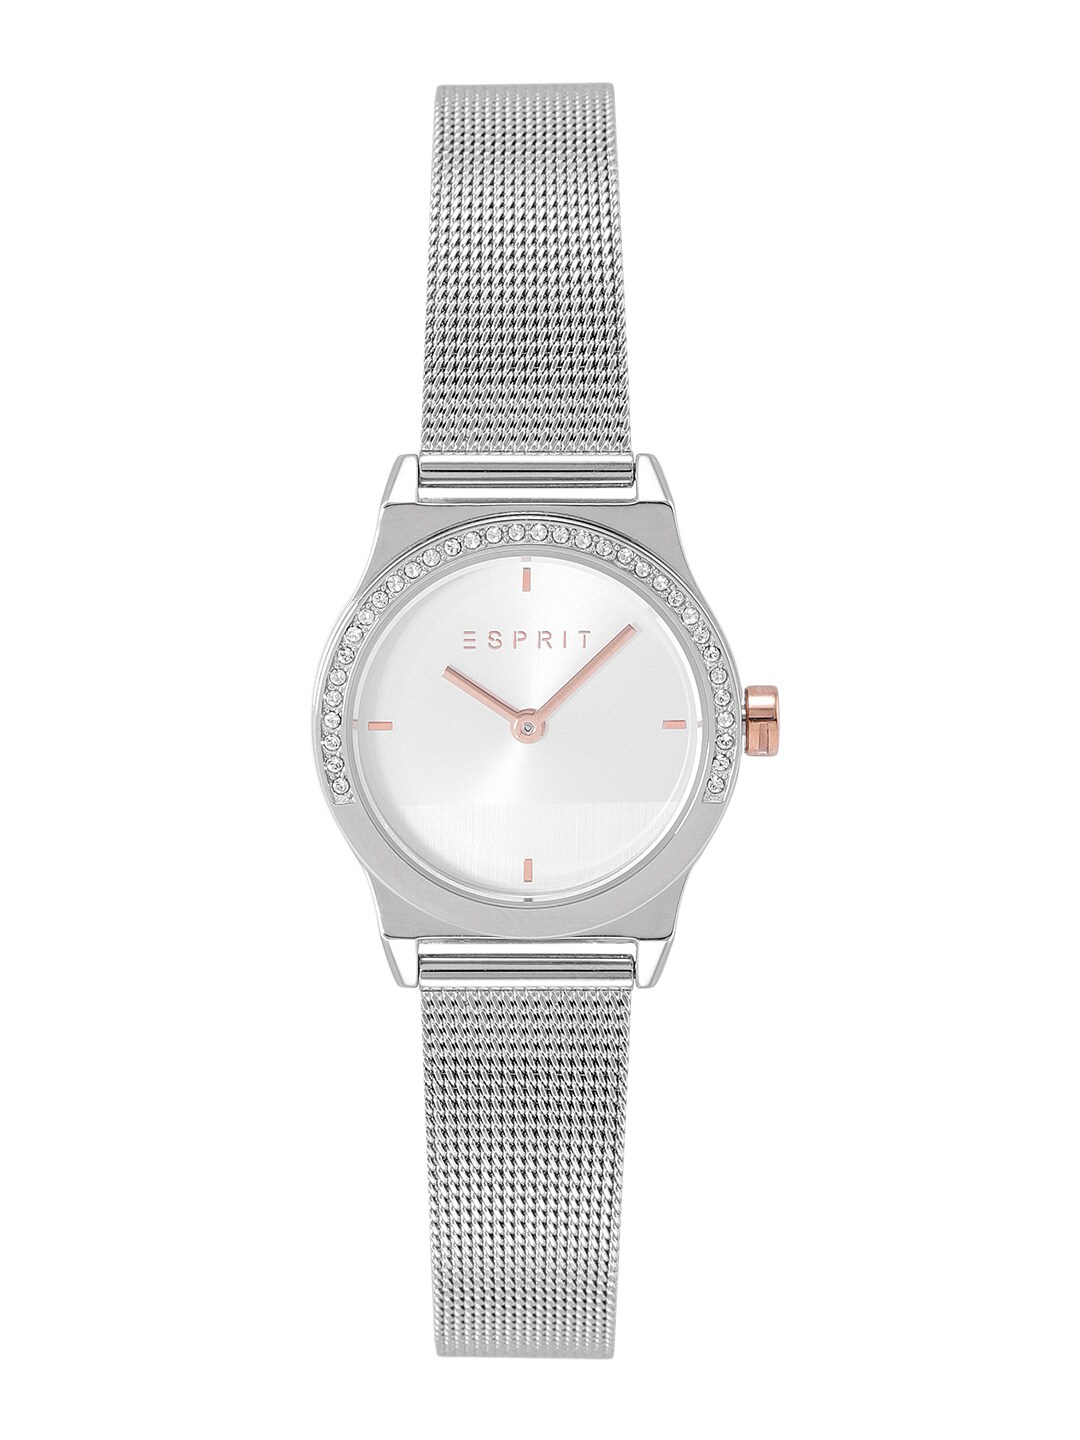 ESPRIT Women Silver-Toned Analogue Watch ES1L091M0045 Price in India